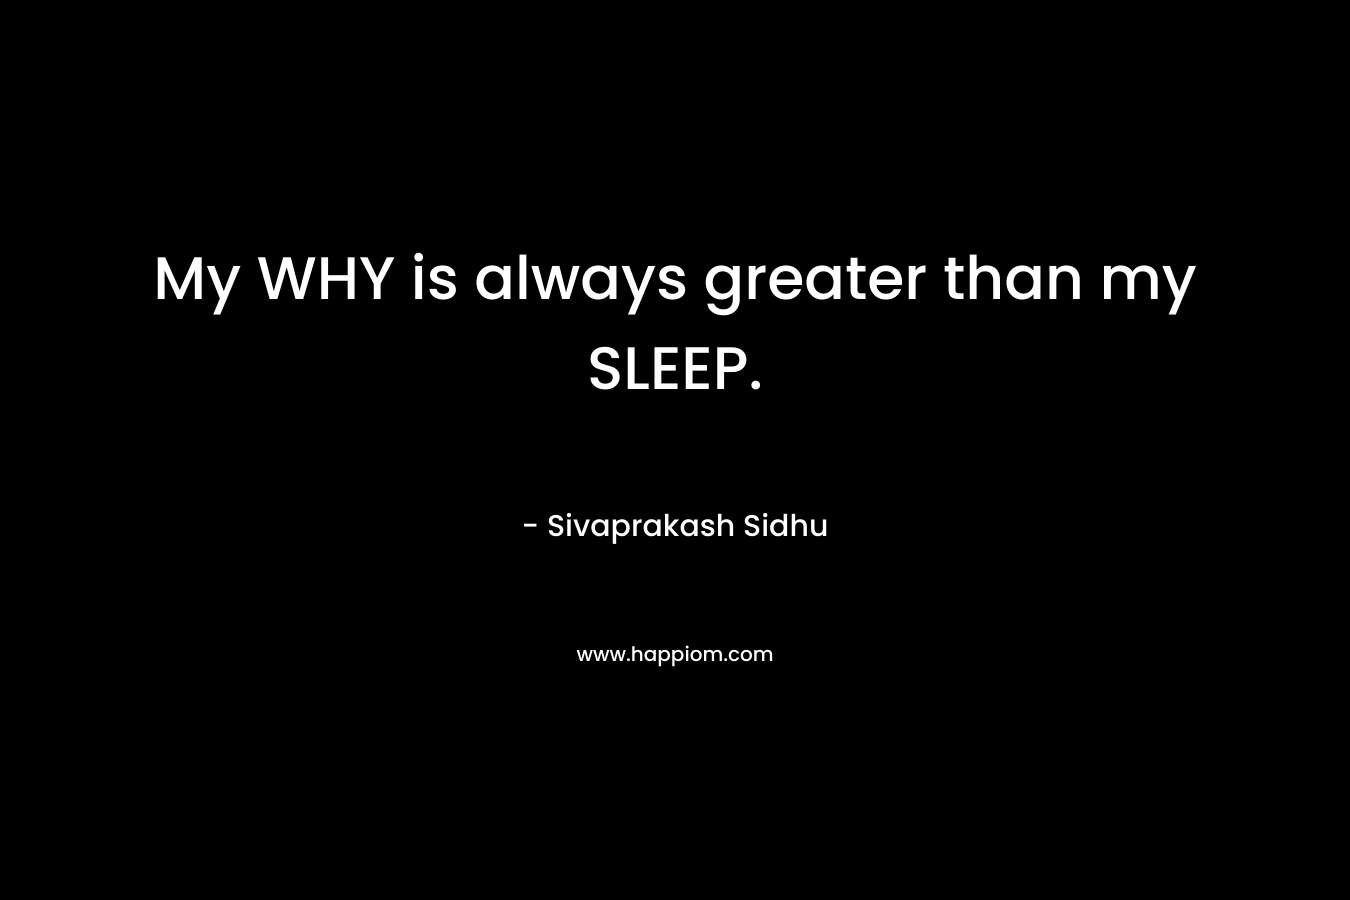 My WHY is always greater than my SLEEP.